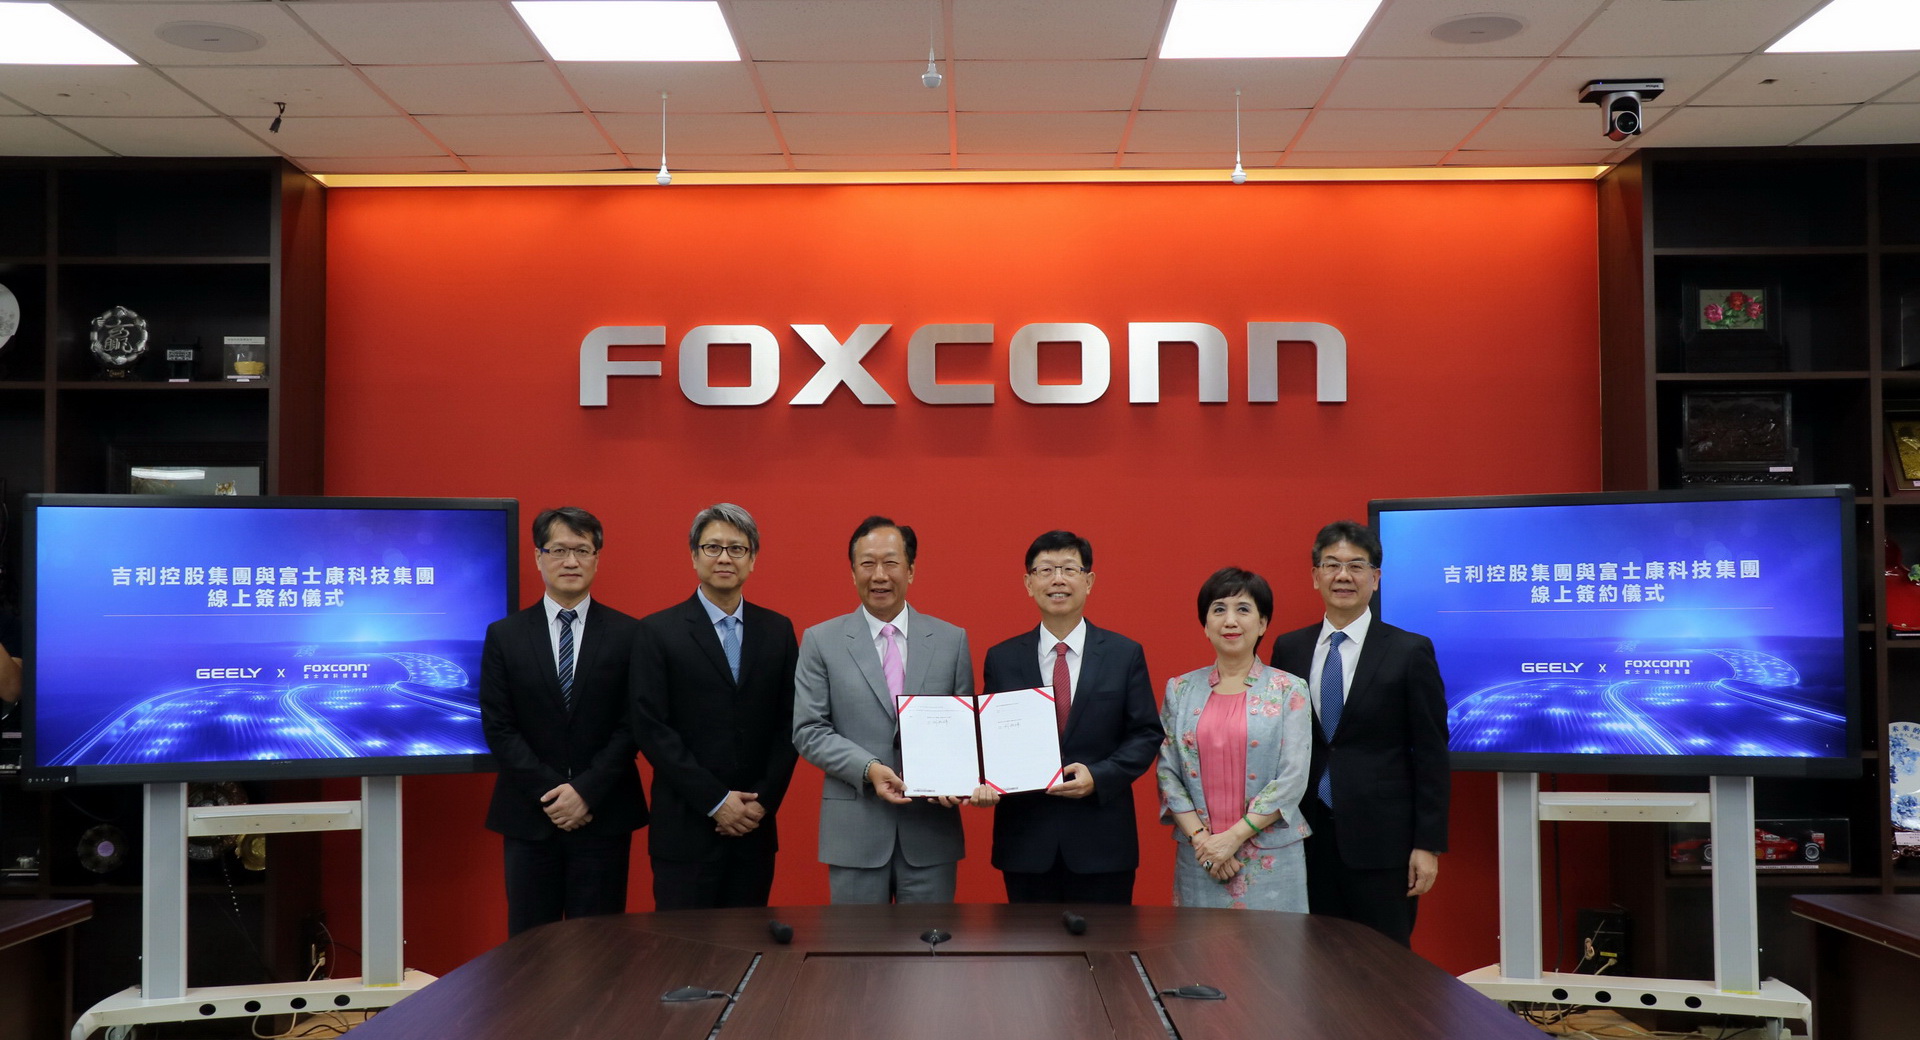 Geely And Foxconn Team Up To Build Cars For Other Brands